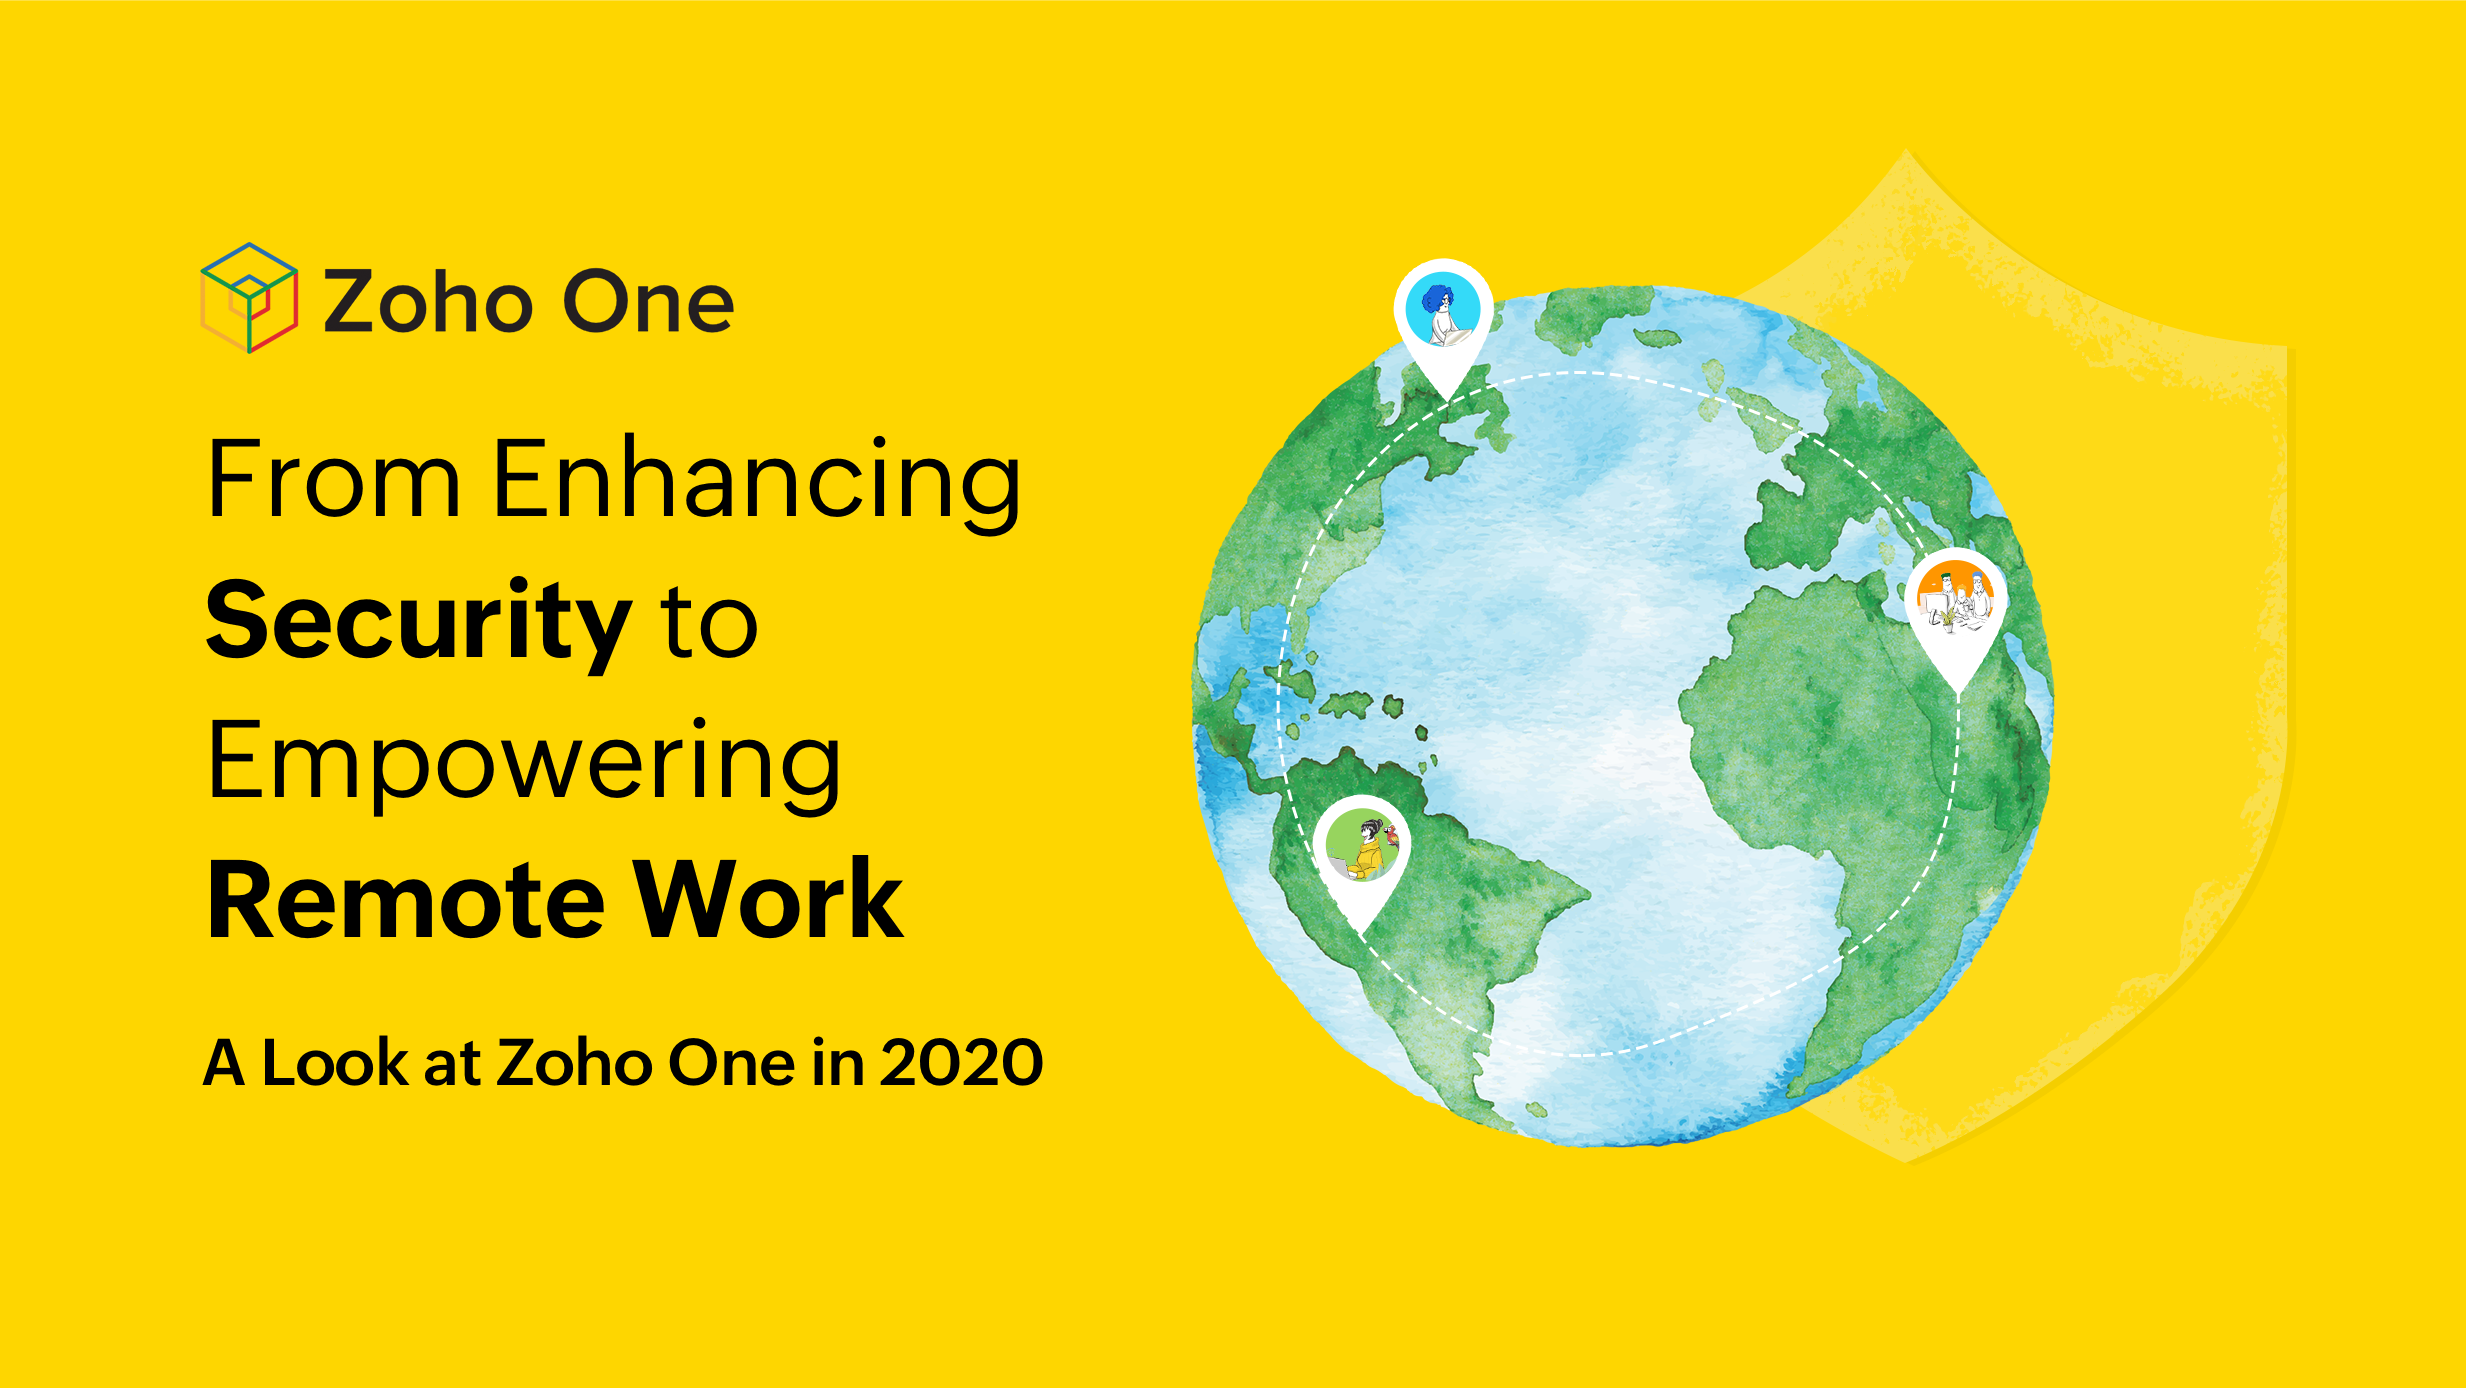 From Enhancing Security to Empowering Remote Work: A Look at Zoho One in 2020